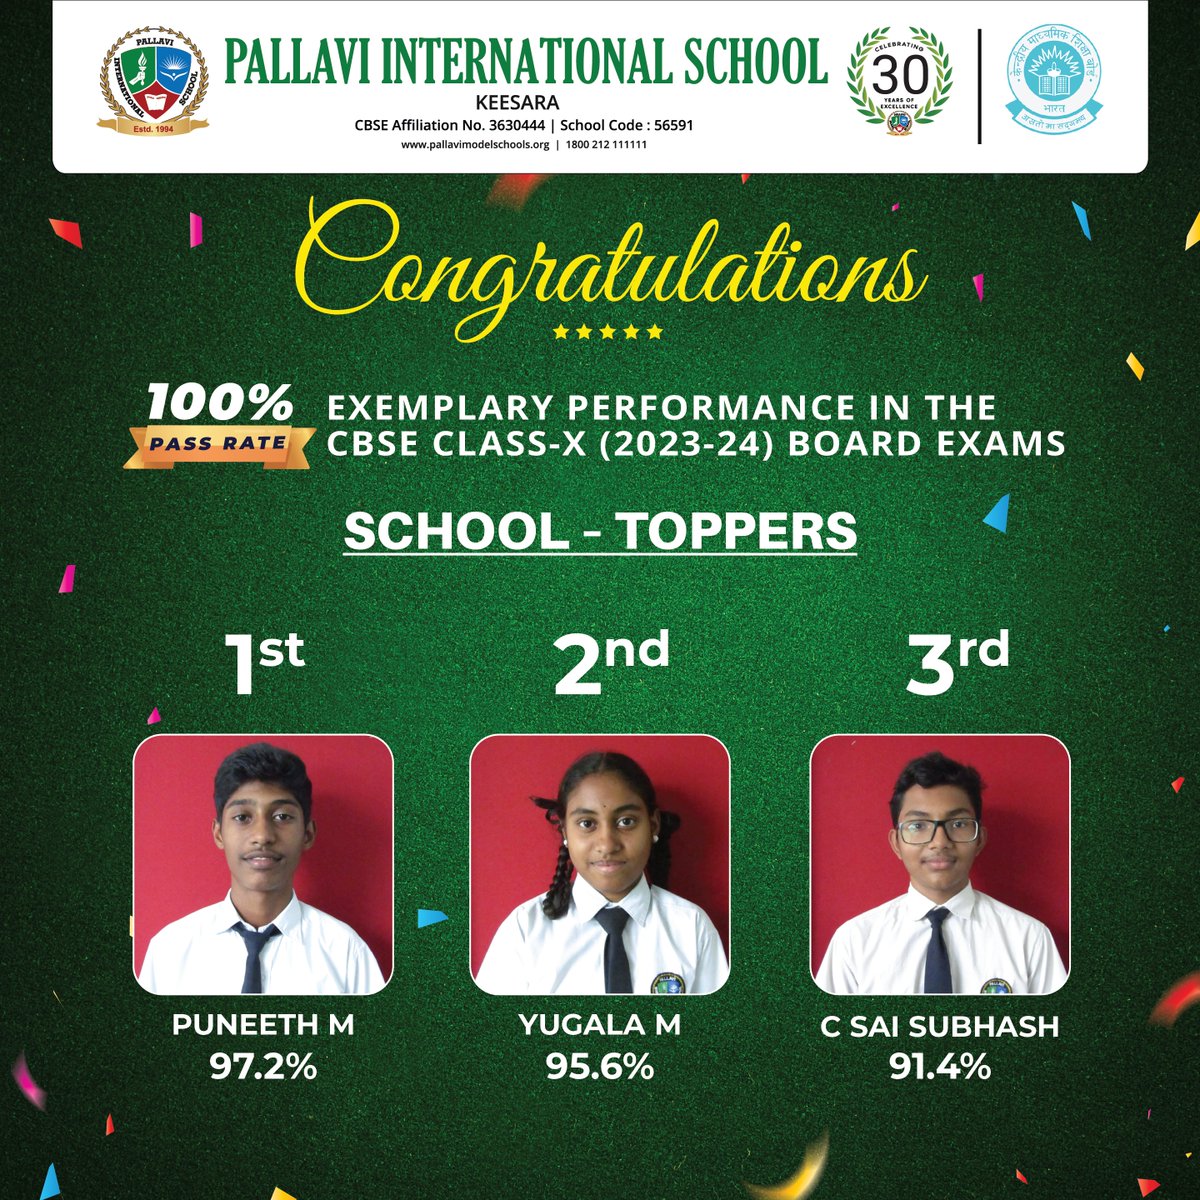 🎉 Woohoo! 🎓 Class X results are out🚀 Congratulations to all the achievers! 🌟 Your dedication shines bright, paving the way for a brilliant future! 💫

#classxresults #celebratesucces #brightfuture #proudmoment #excellence #toppersrock #pgos #pis #piskeesara #keesara